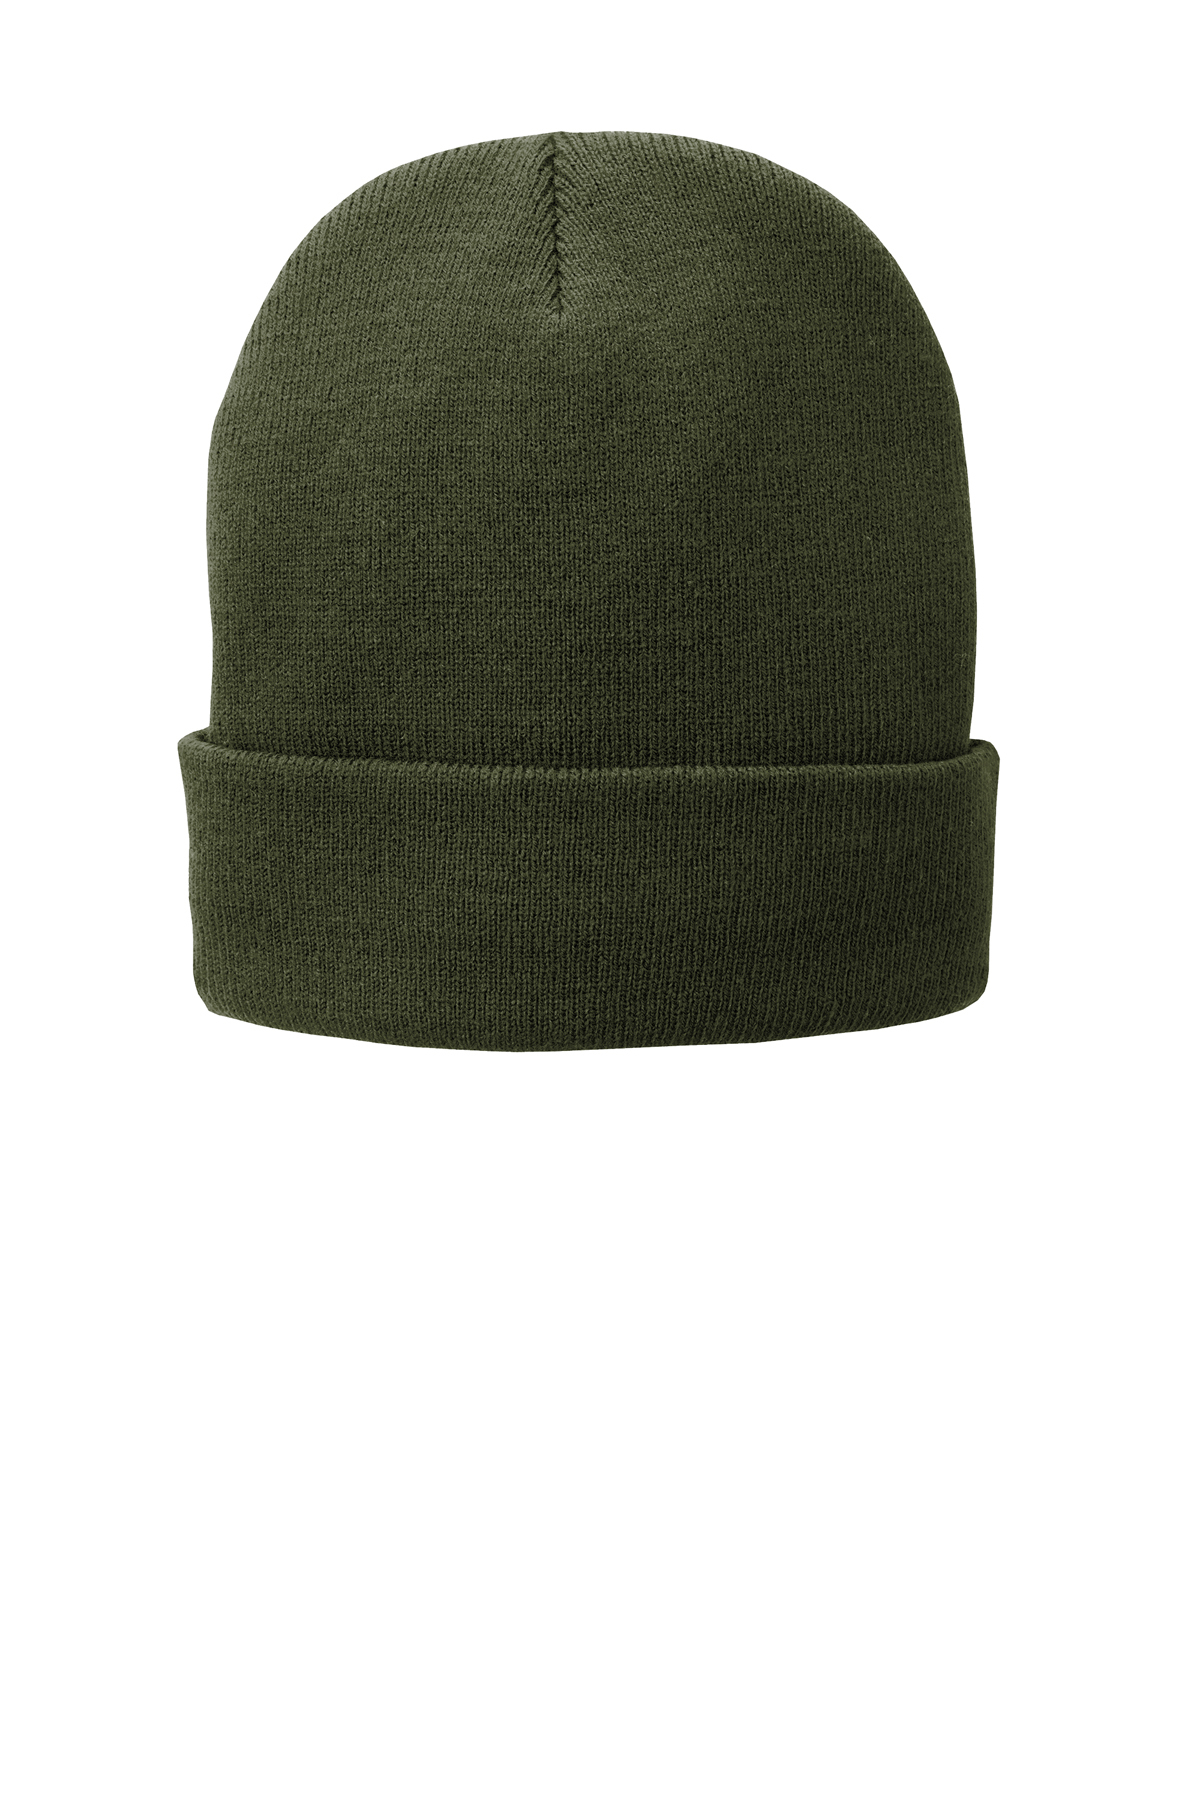 click to view Olive Drab Green